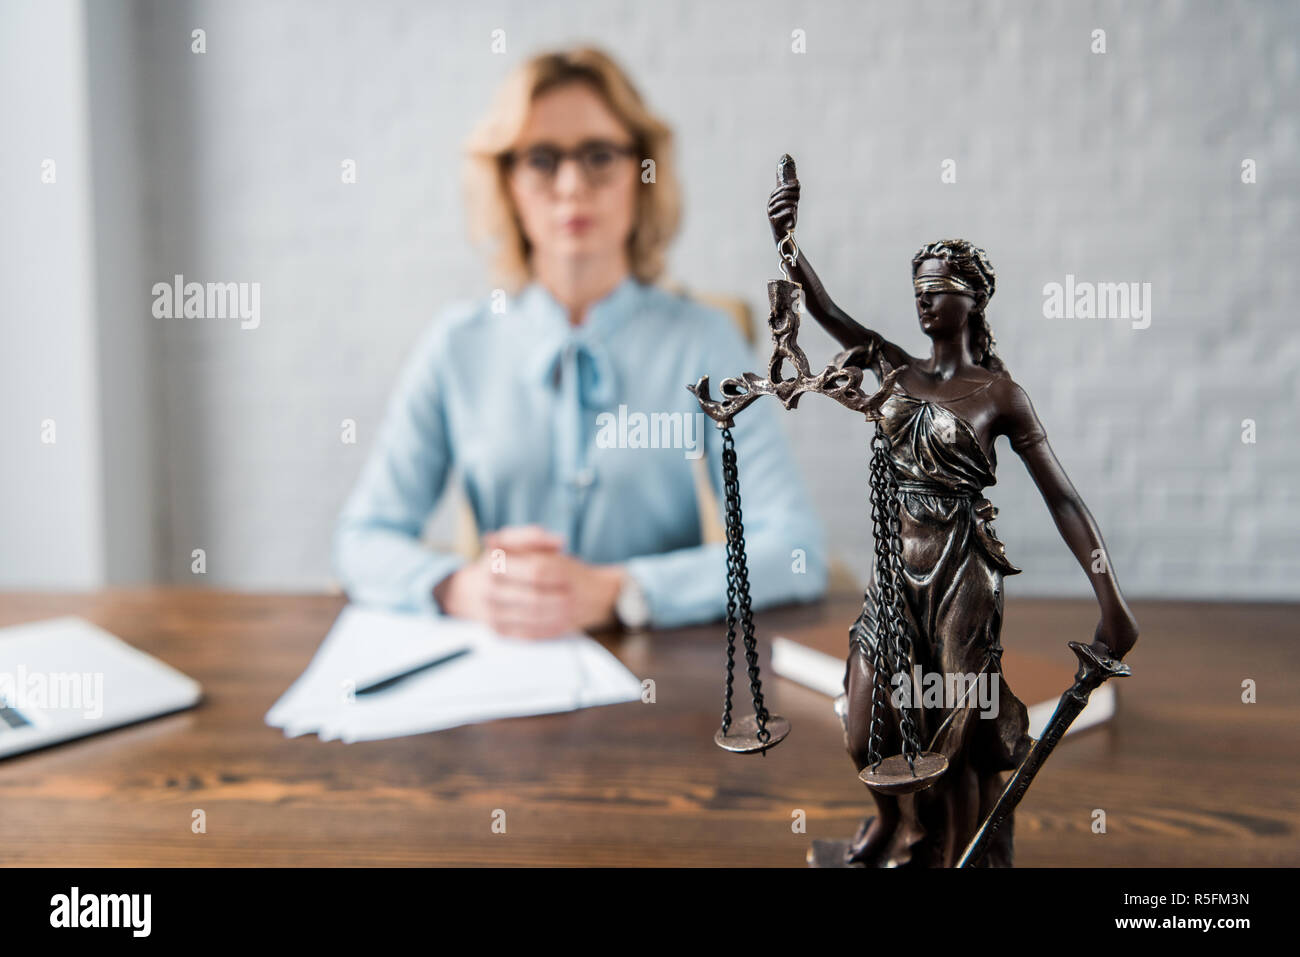 close-up view of lady justice statue and female lawyer working behind Stock Photo